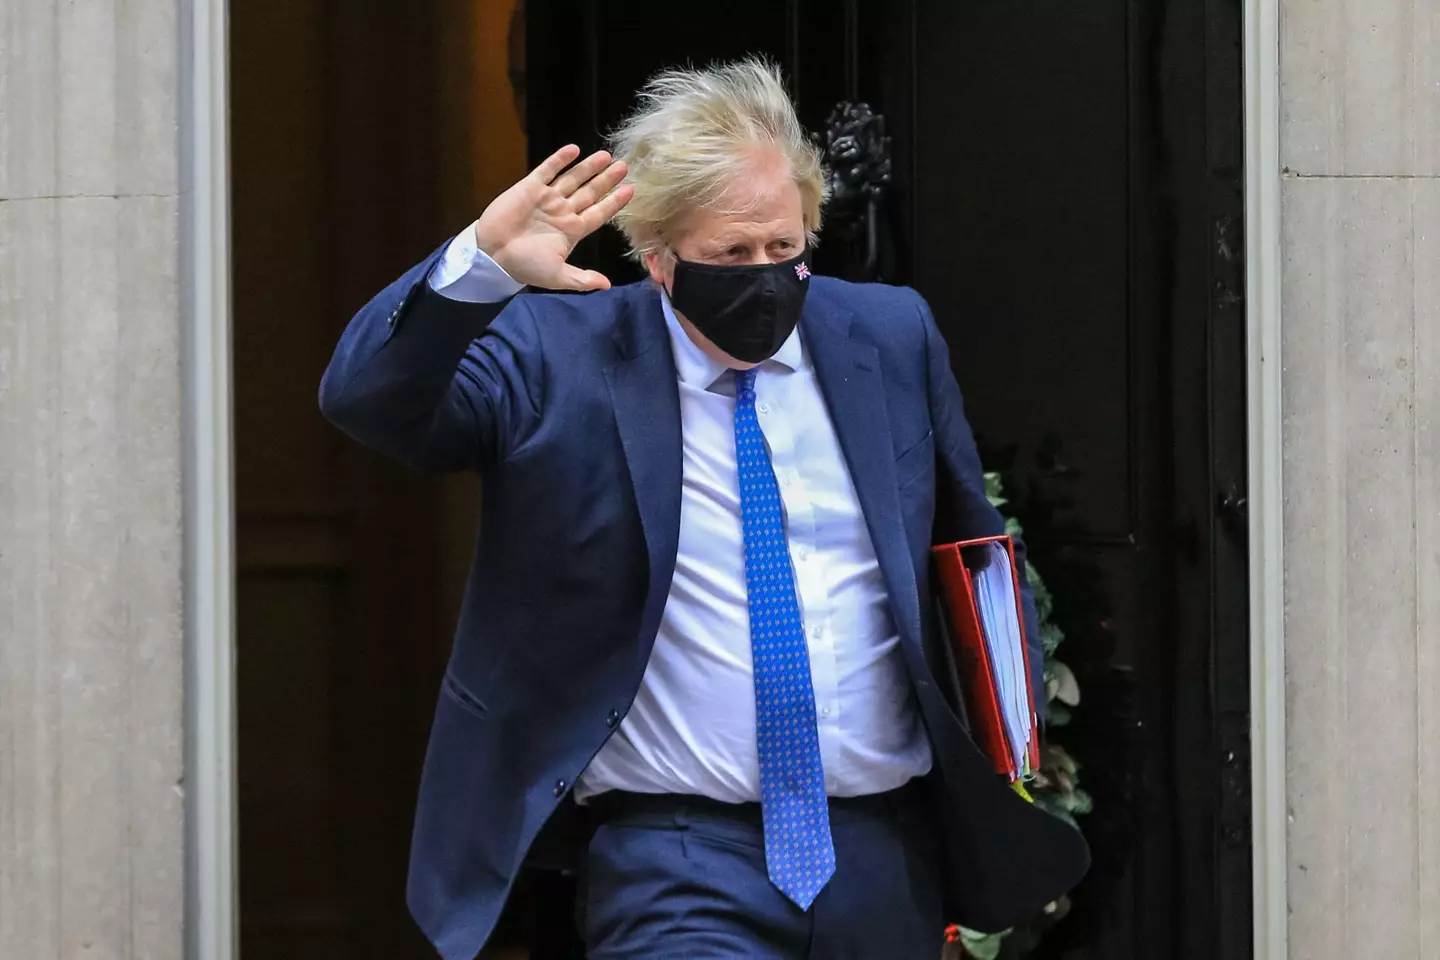 It's been a chaotic week for Boris (